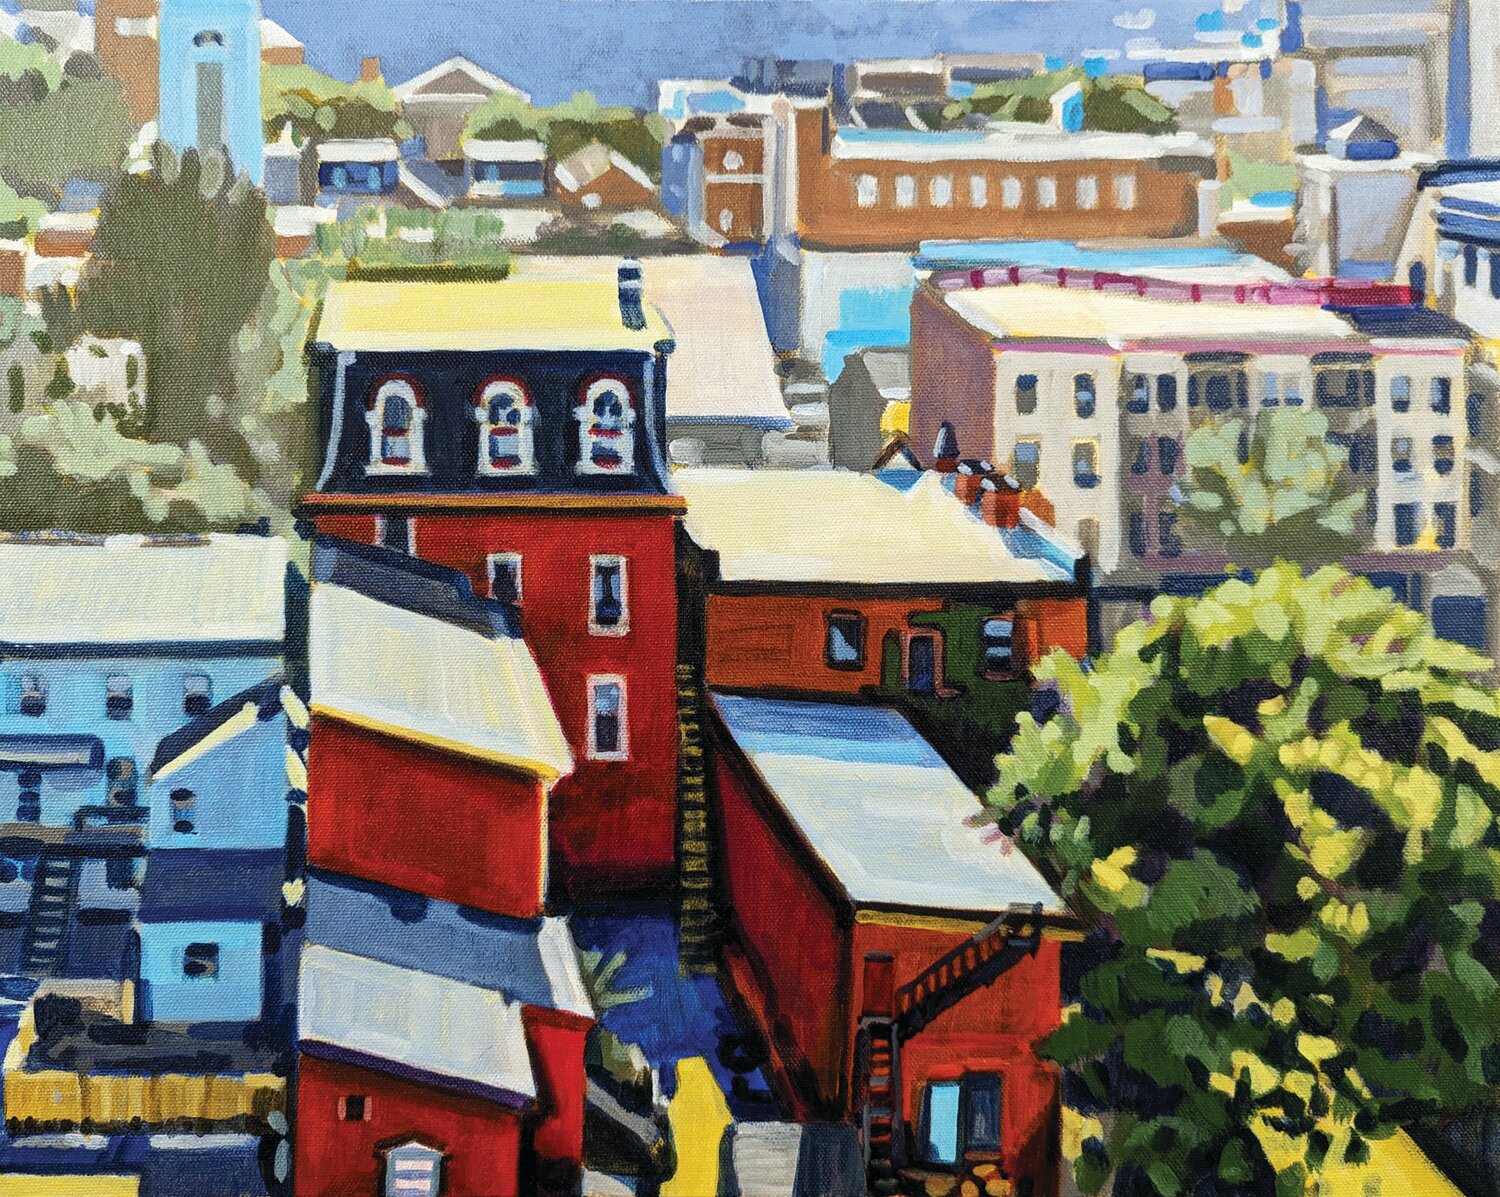 “Above the Rooftops” is an oil on canvas by Francisco Silva.